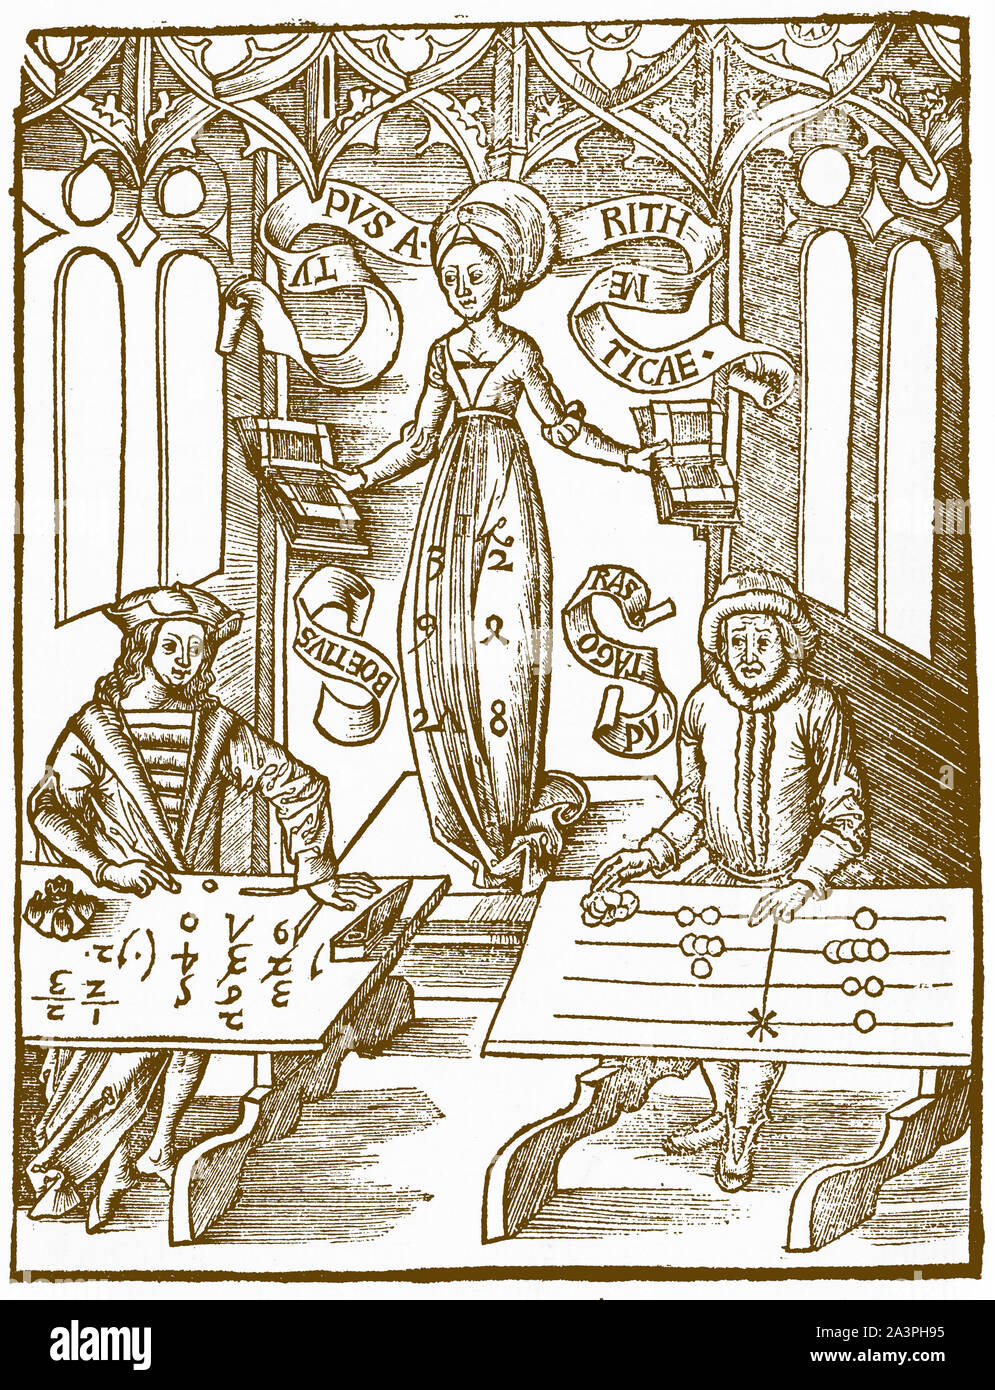 Woodcut of Madame Arithmatica overlooking a medieval mathemetician using arabic numerals (left) and a merchant (right) with a counting board puzzling over their calculations. From Margarita Philosophica (The Philosphical Pearl) by Gregor Reisch, 1508 Stock Photo